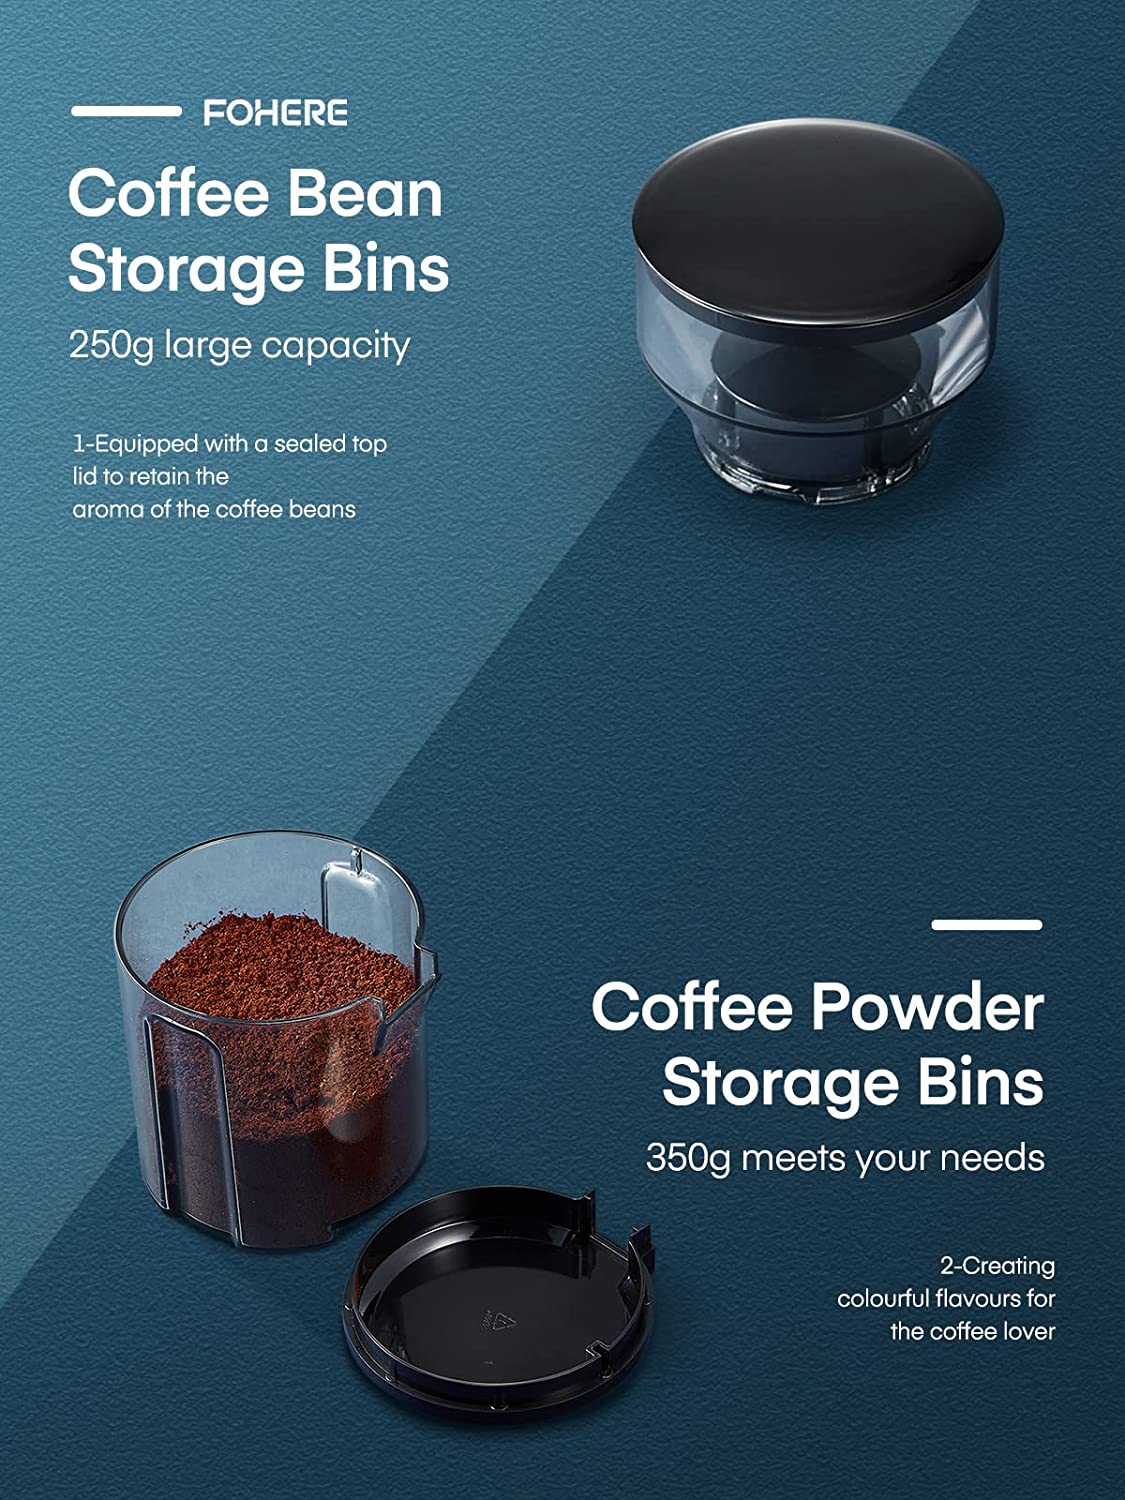 coffee bean storage bins, Coffee Grinder Electric, FOHERE Coffee Bean Grinder with 18 Precise Grind Settings, 2-14 Cup for Drip, Percolator, French Press, Espresso and Turkish Coffee Makers, Black